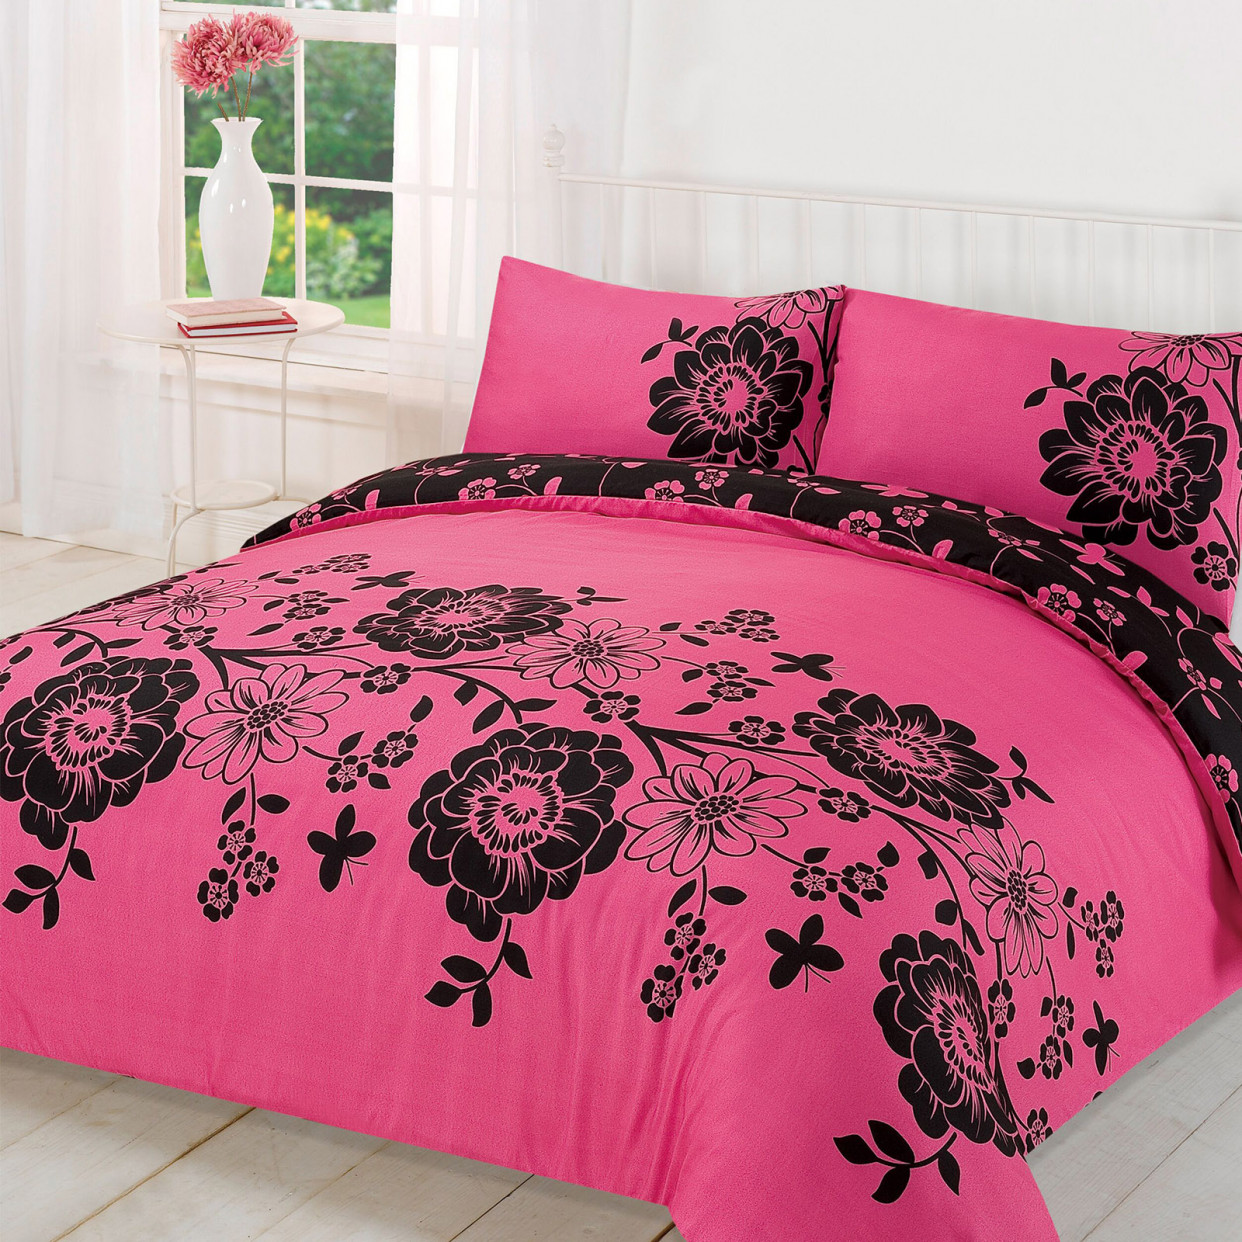 Roslyn Duvet Cover with pillowcase set - Pink/Black - King Size >